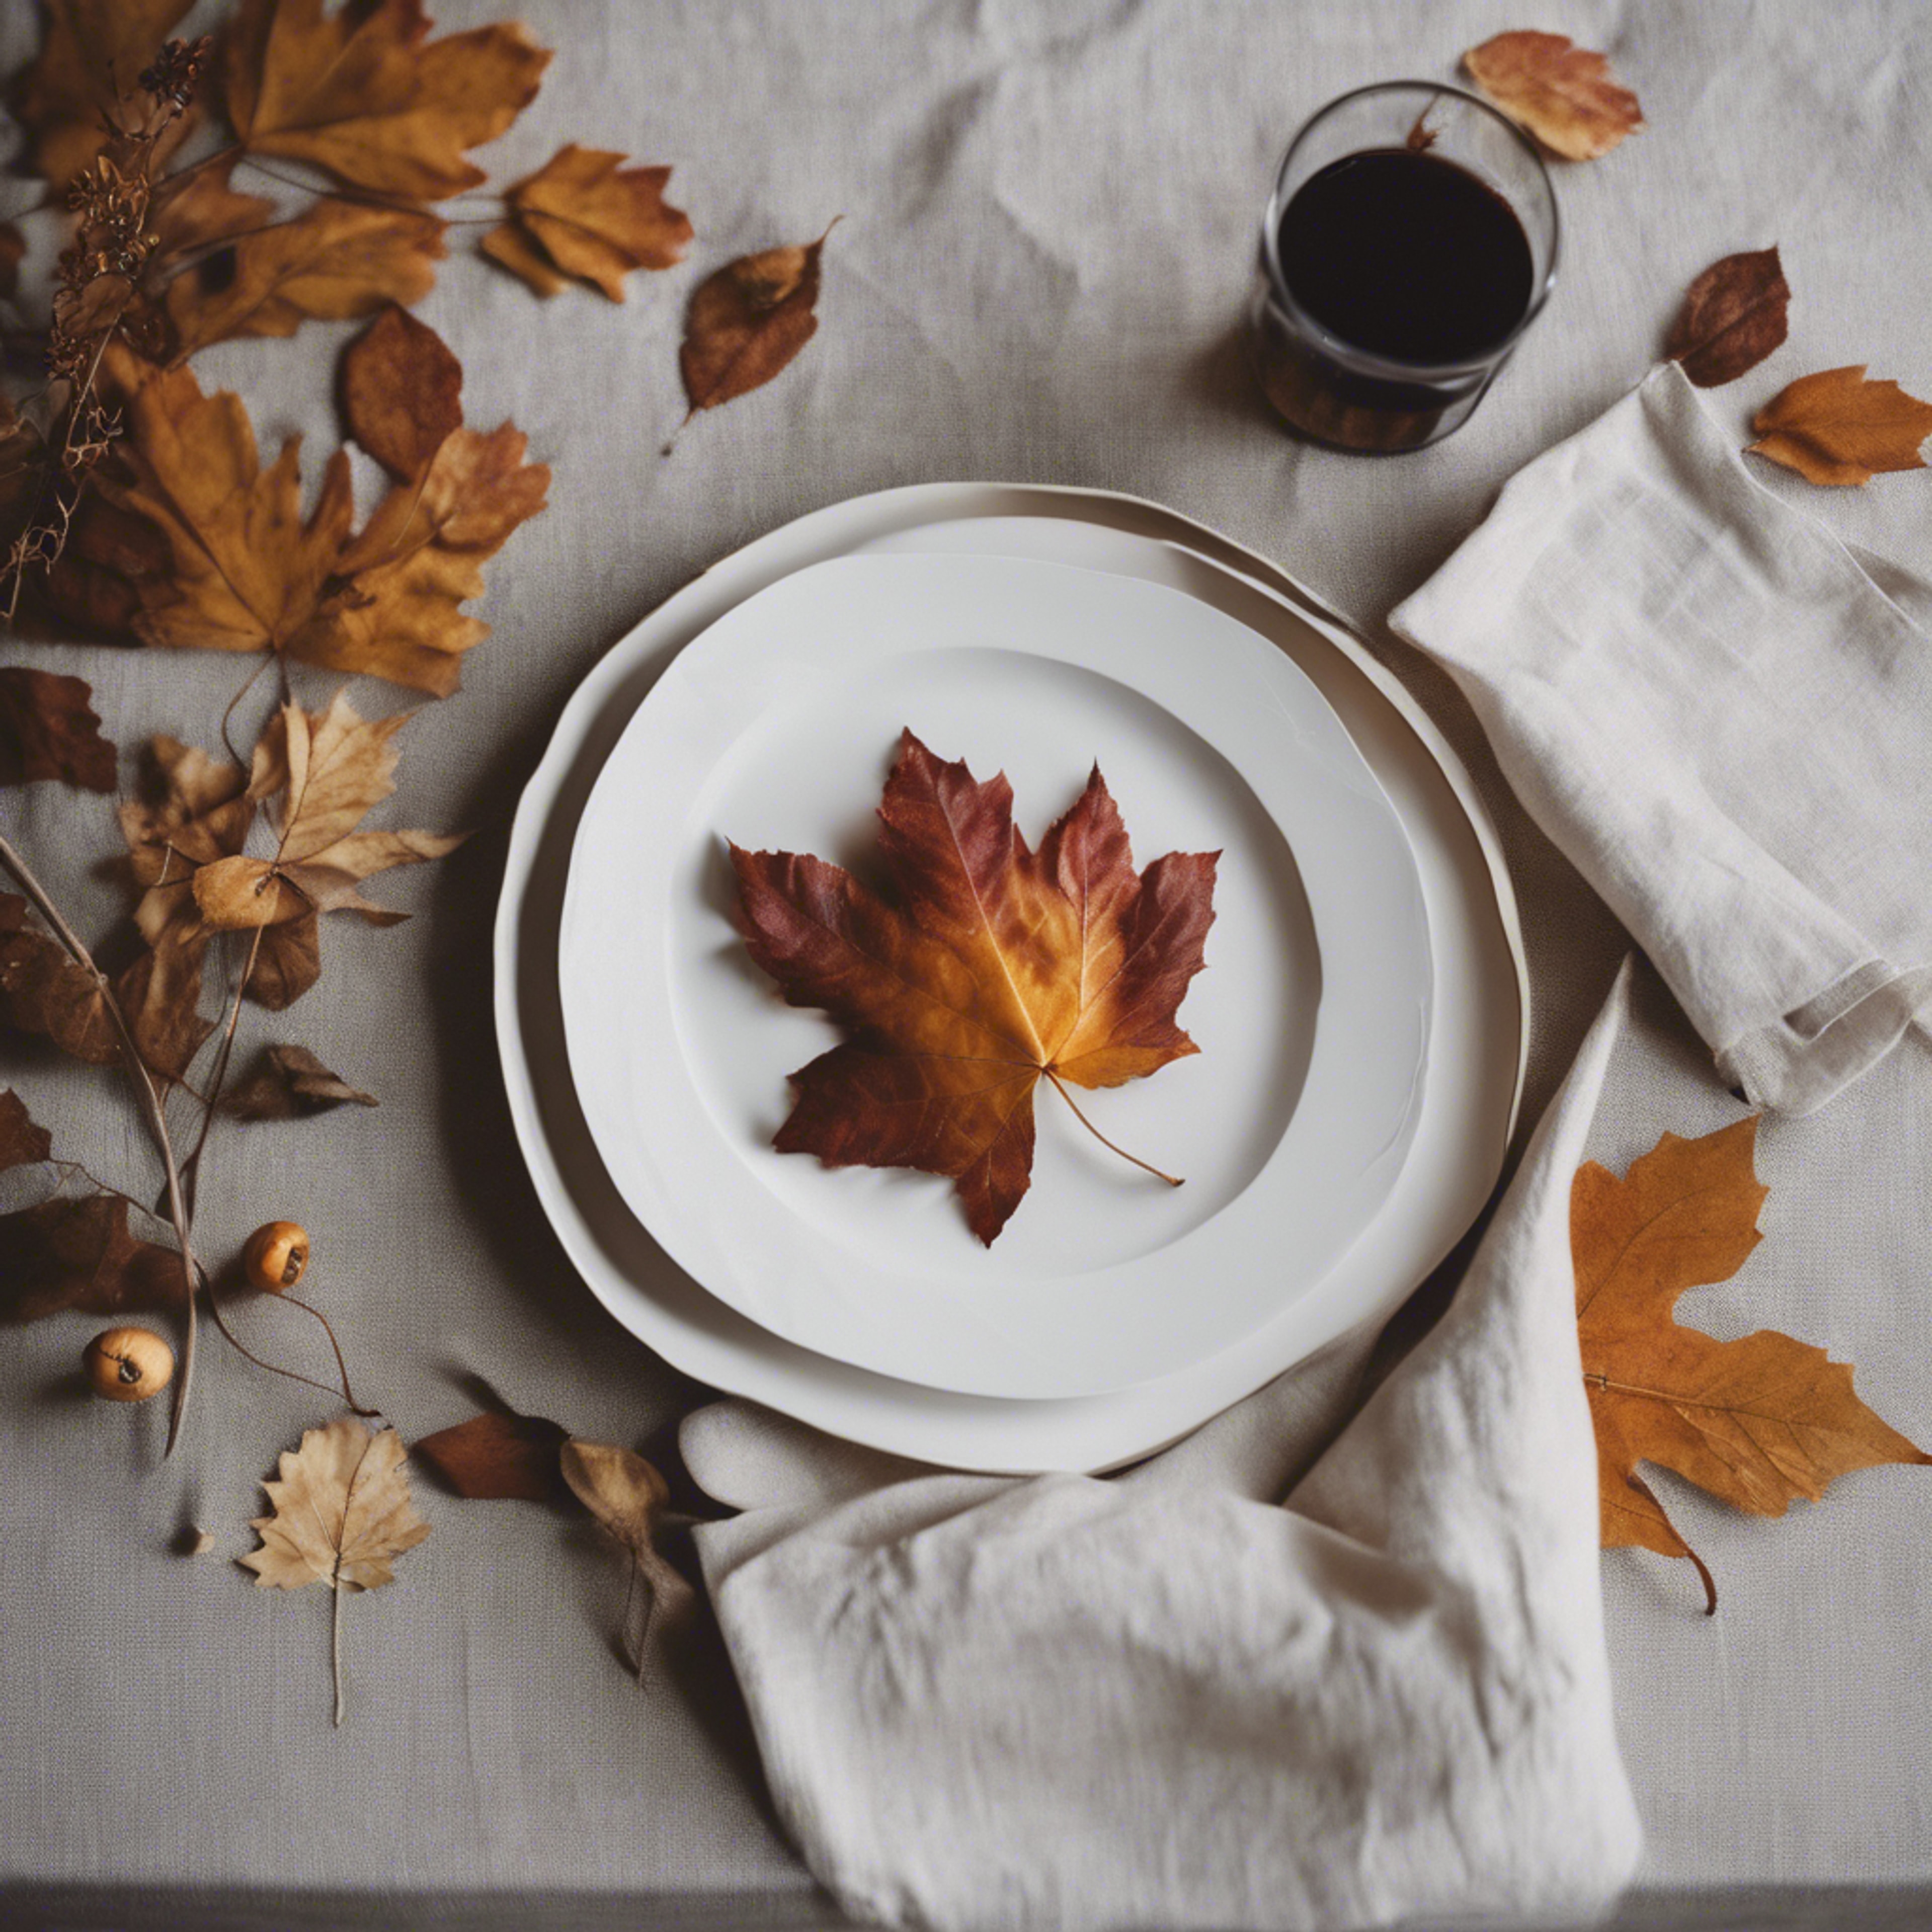 Simplicity-lover's Thanksgiving table decor with minimalistic white plates, natural linen napkins, and a few scattered autumn leaves. 벽지[4fdd30c95e164a8e8309]